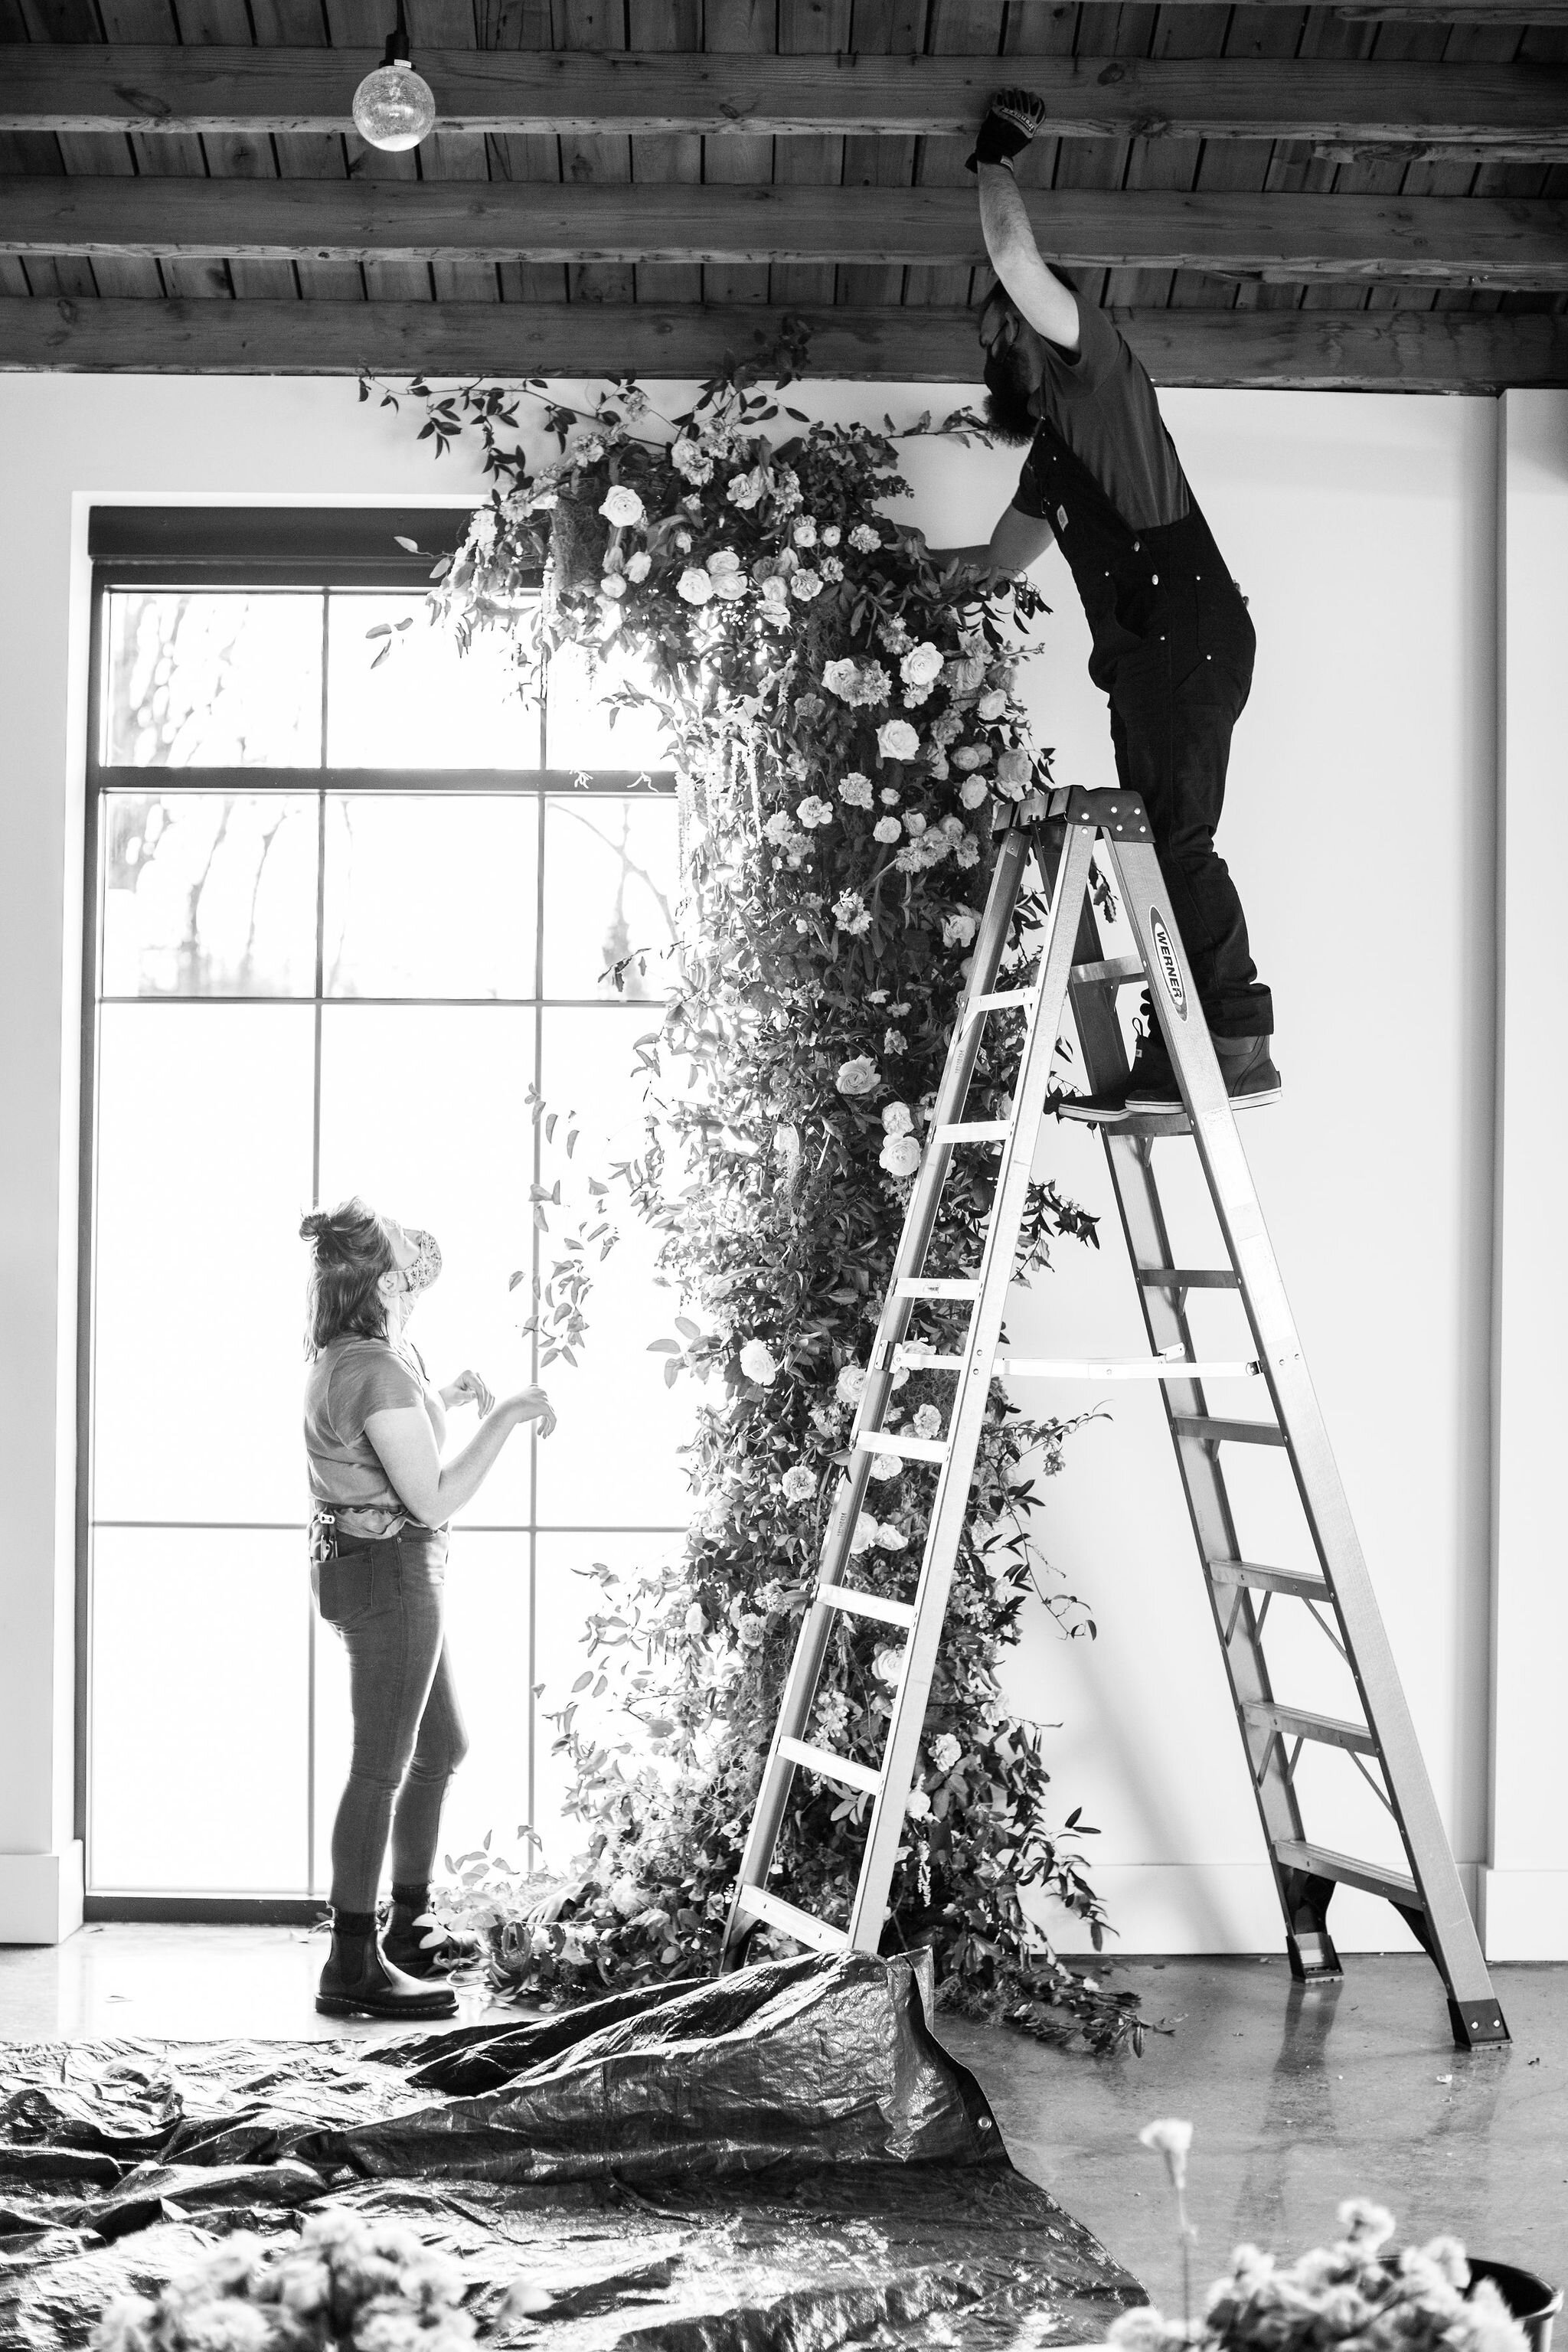 An intimate installation intensive at The Saint Elle in Nashville. Students learned how to create and build 3 different kinds of installations over the course of the day. Hosted and designed by floral designer Rosemary & Finch.